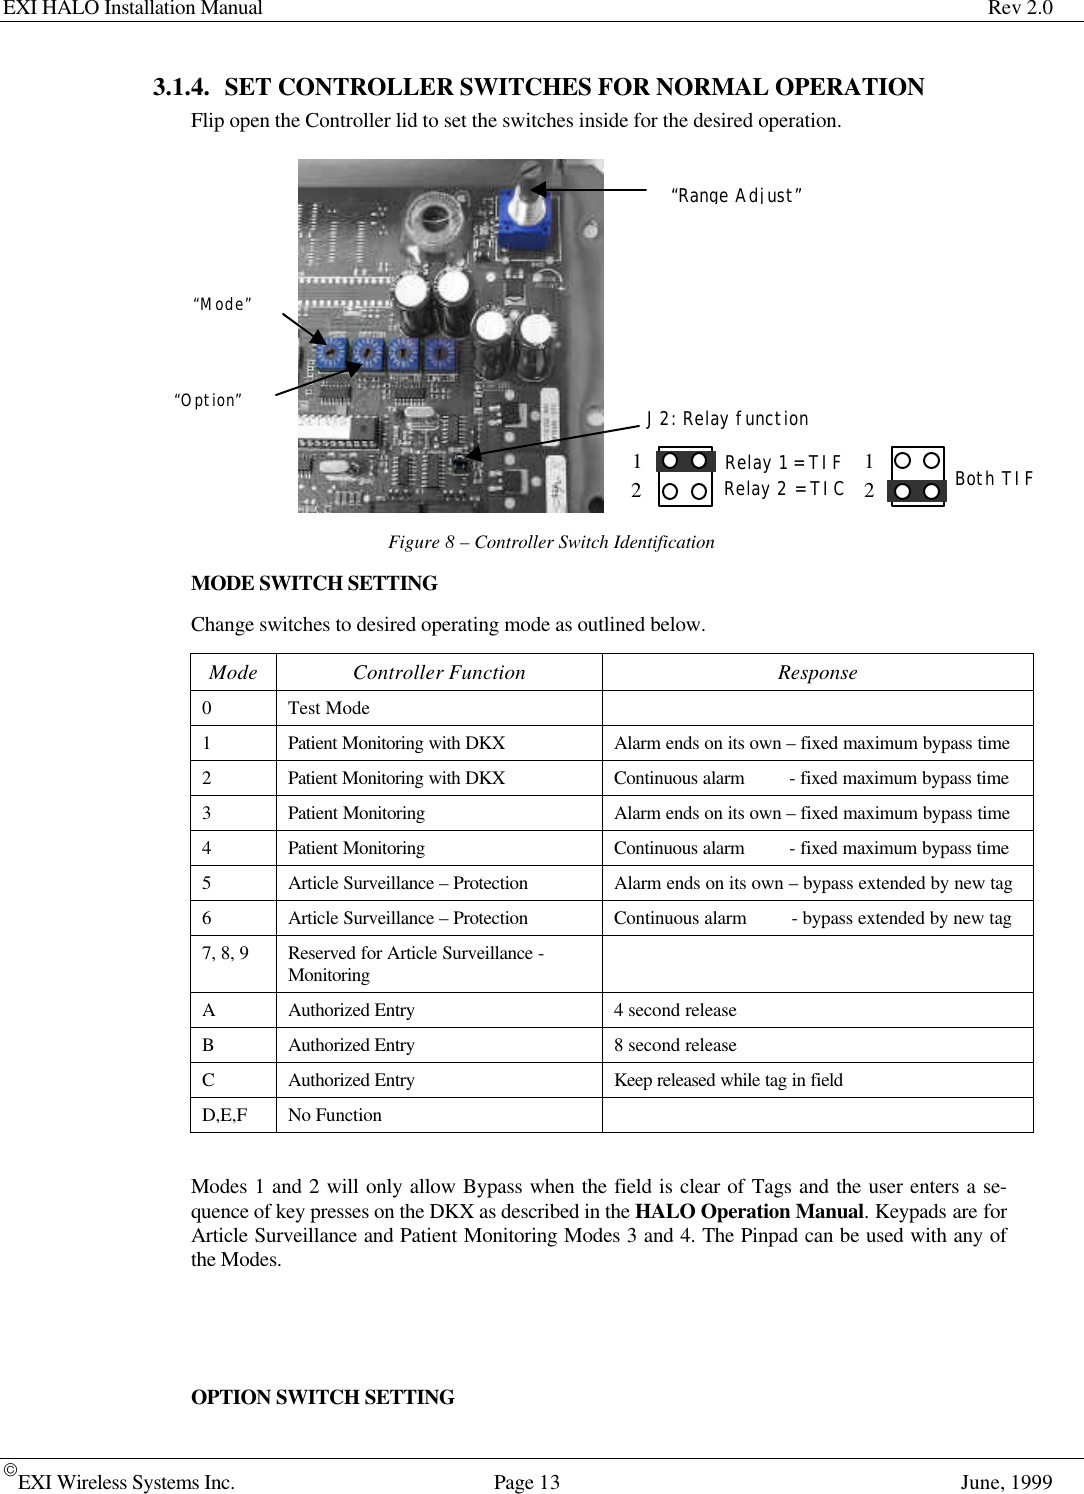 EXI HALO Installation Manual Rev 2.0EXI Wireless Systems Inc. Page 13 June, 19993.1.4. SET CONTROLLER SWITCHES FOR NORMAL OPERATIONFlip open the Controller lid to set the switches inside for the desired operation.Figure 8 – Controller Switch IdentificationMODE SWITCH SETTINGChange switches to desired operating mode as outlined below.Mode Controller Function Response0Test Mode1Patient Monitoring with DKX Alarm ends on its own – fixed maximum bypass time2Patient Monitoring with DKX Continuous alarm         - fixed maximum bypass time3Patient Monitoring Alarm ends on its own – fixed maximum bypass time4Patient Monitoring Continuous alarm         - fixed maximum bypass time5Article Surveillance – Protection Alarm ends on its own – bypass extended by new tag6Article Surveillance – Protection Continuous alarm         - bypass extended by new tag7, 8, 9 Reserved for Article Surveillance -MonitoringAAuthorized Entry 4 second releaseBAuthorized Entry 8 second releaseCAuthorized Entry Keep released while tag in fieldD,E,F No FunctionModes 1 and 2 will only allow Bypass when the field is clear of Tags and the user enters a se-quence of key presses on the DKX as described in the HALO Operation Manual. Keypads are forArticle Surveillance and Patient Monitoring Modes 3 and 4. The Pinpad can be used with any ofthe Modes.OPTION SWITCH SETTING“Mode”“Option”Switch“Range Adjust”J2: Relay function12Relay 1 = TIFRelay 2 = TIC 12Both TIF